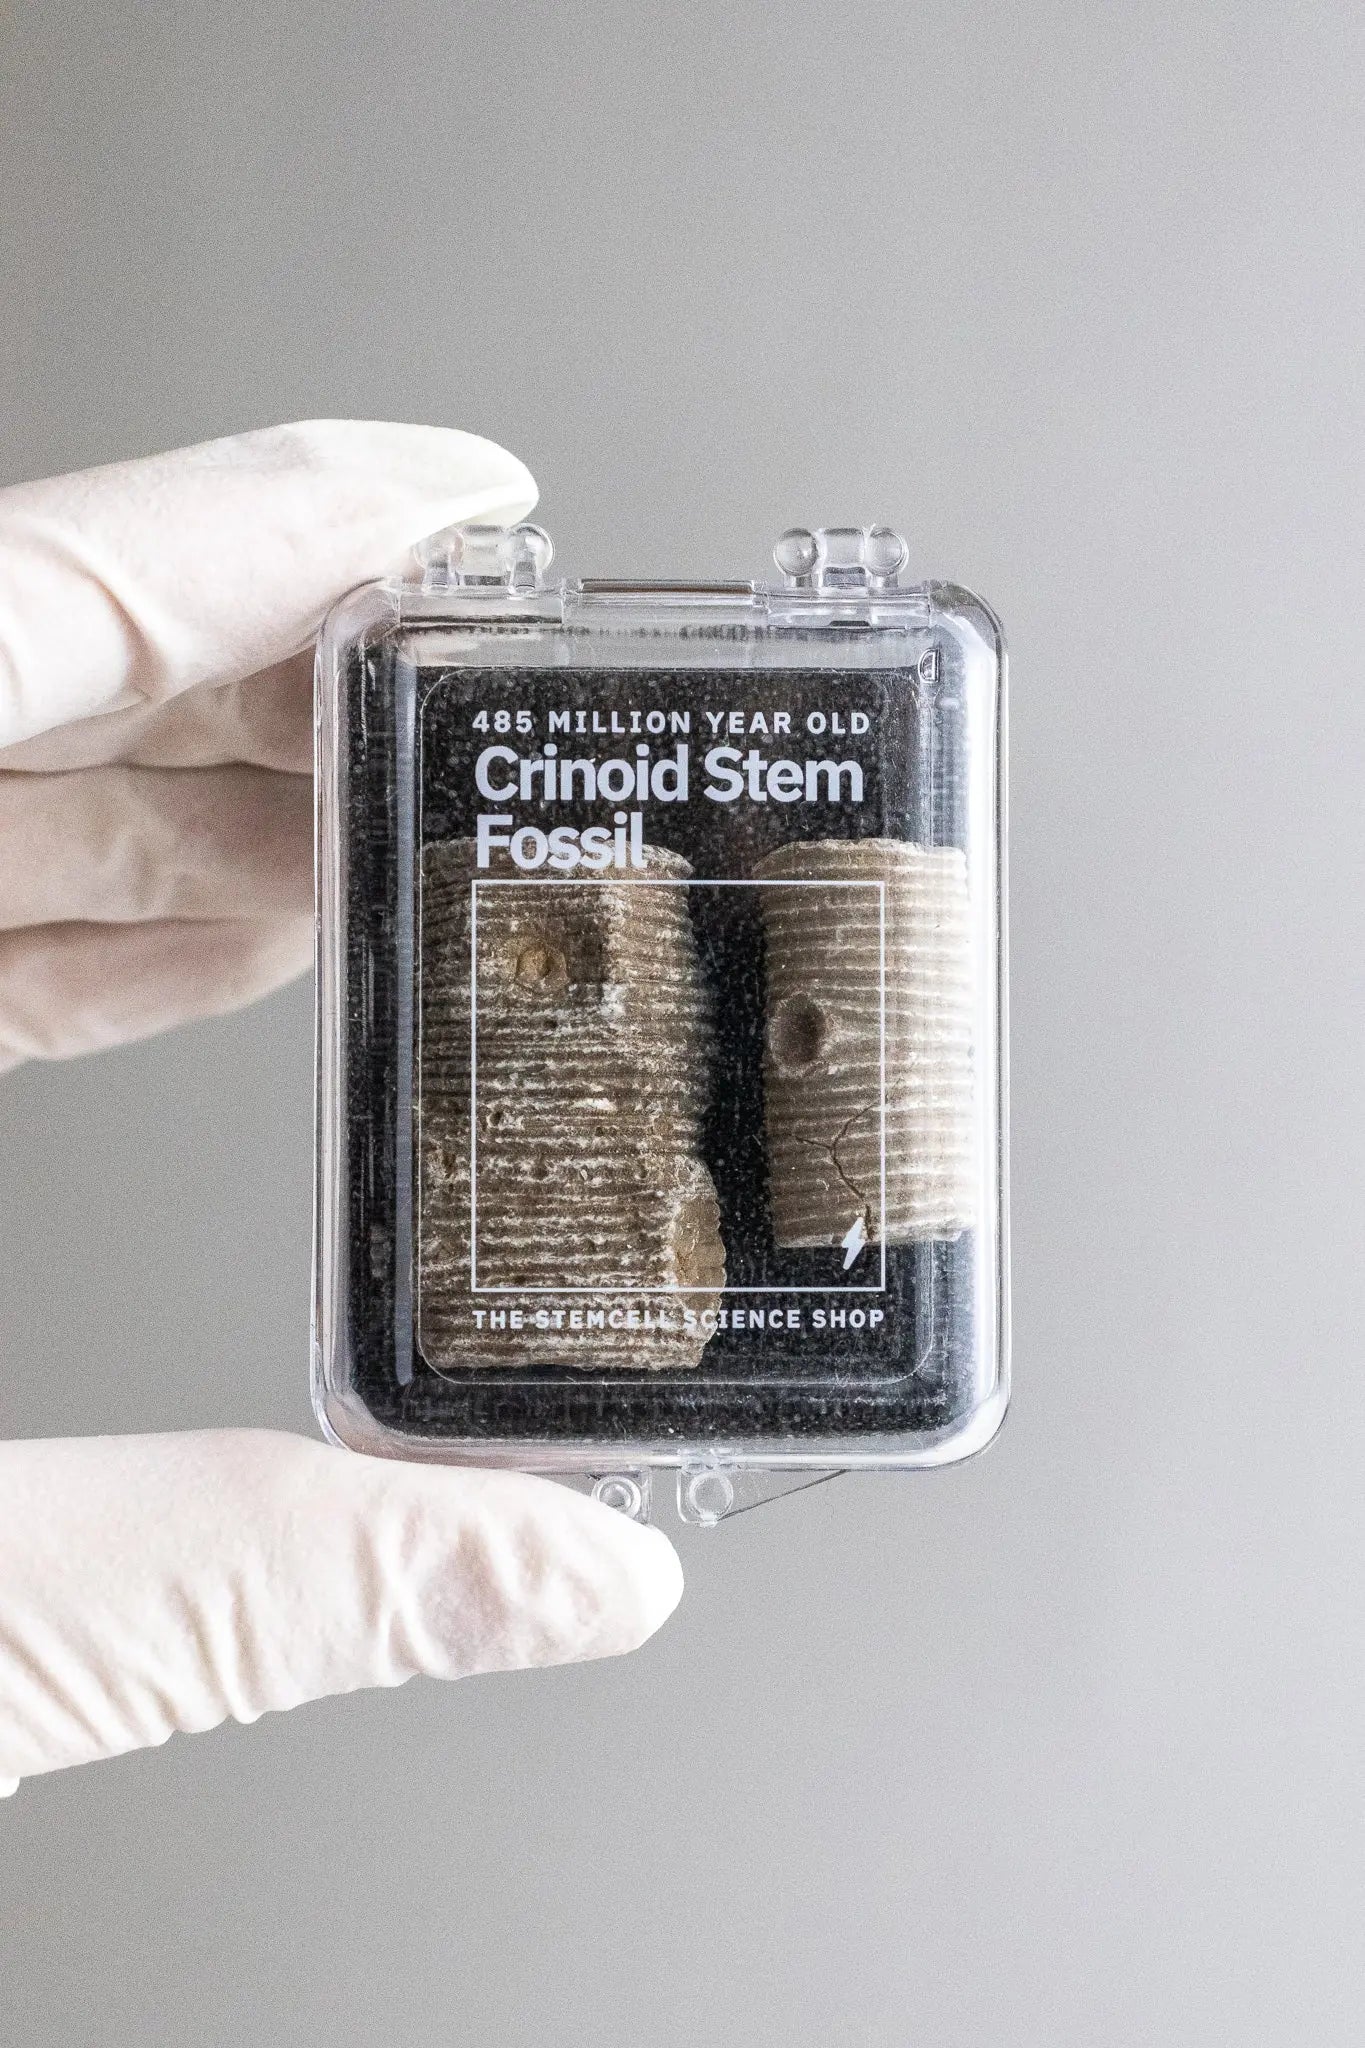 Crinoid Fossil - Stemcell Science Shop